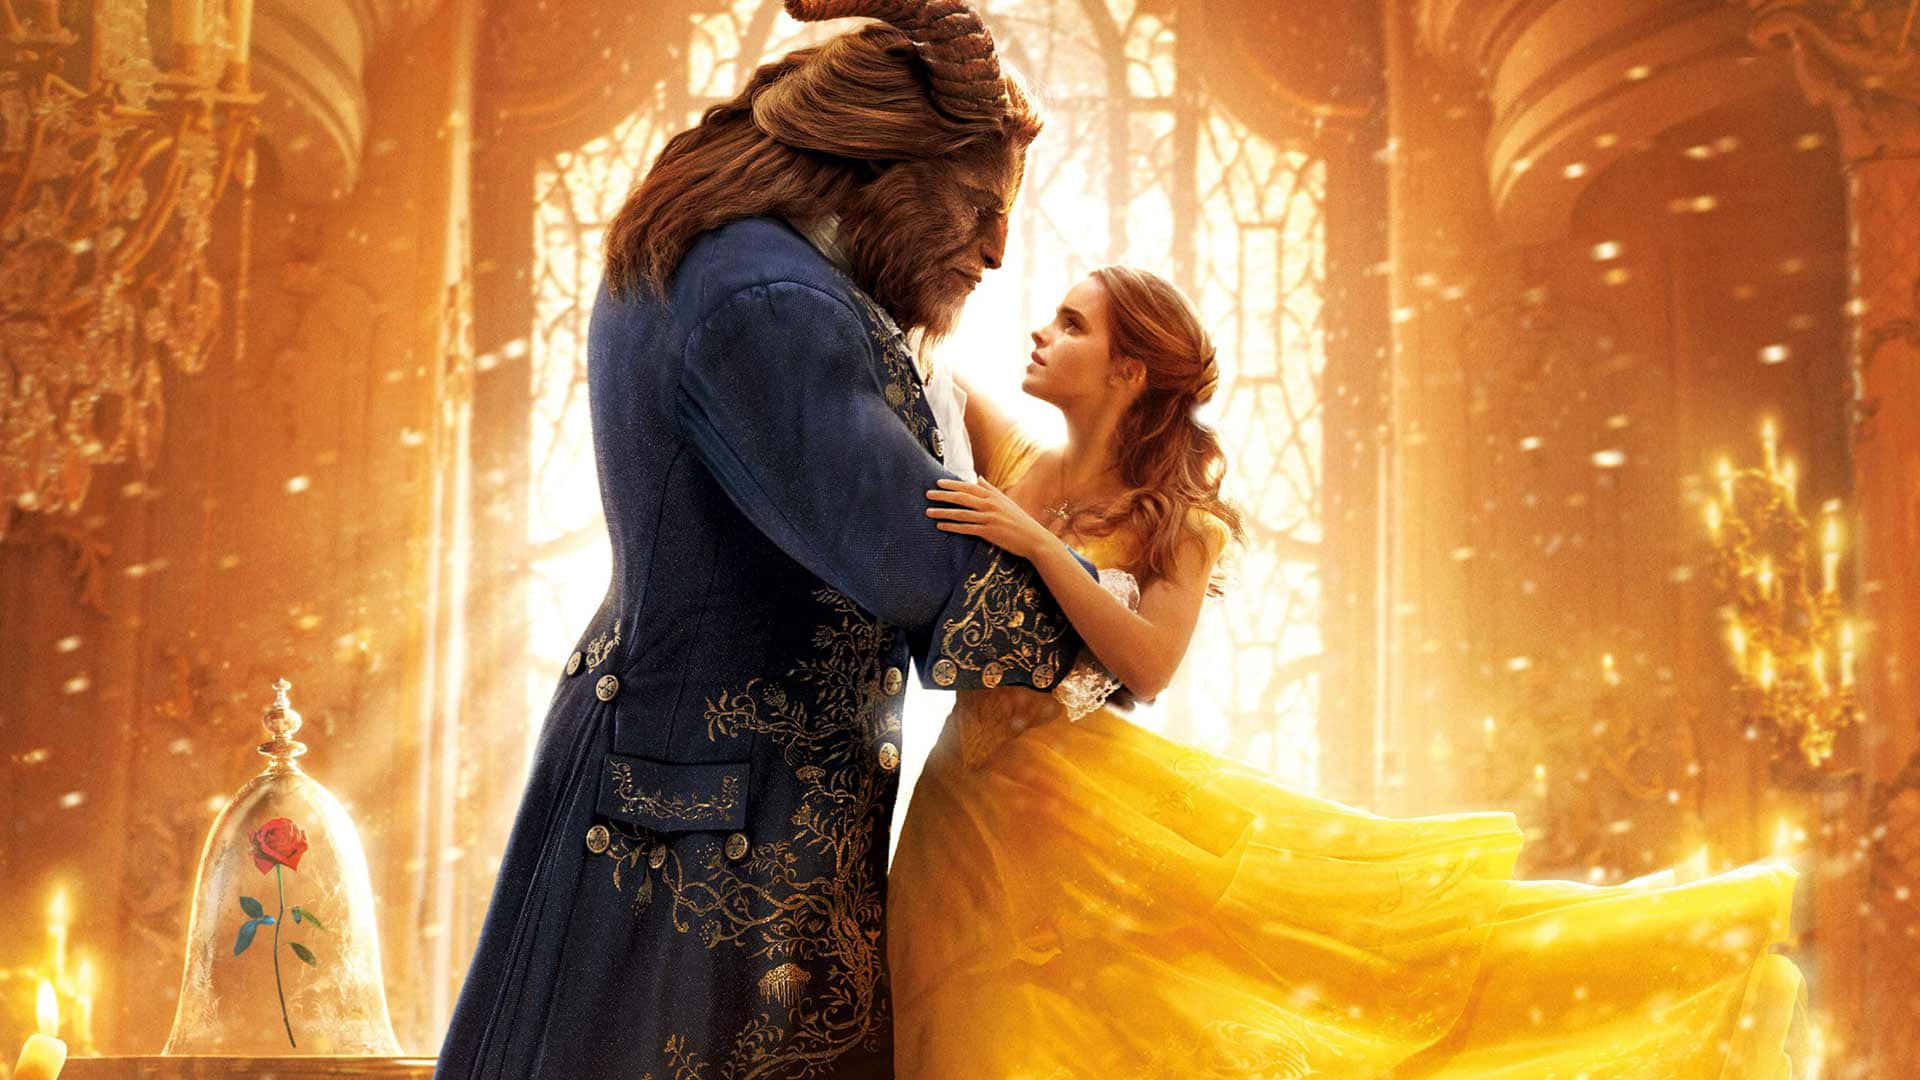 Beauty And The Beast Pictures Wallpaper